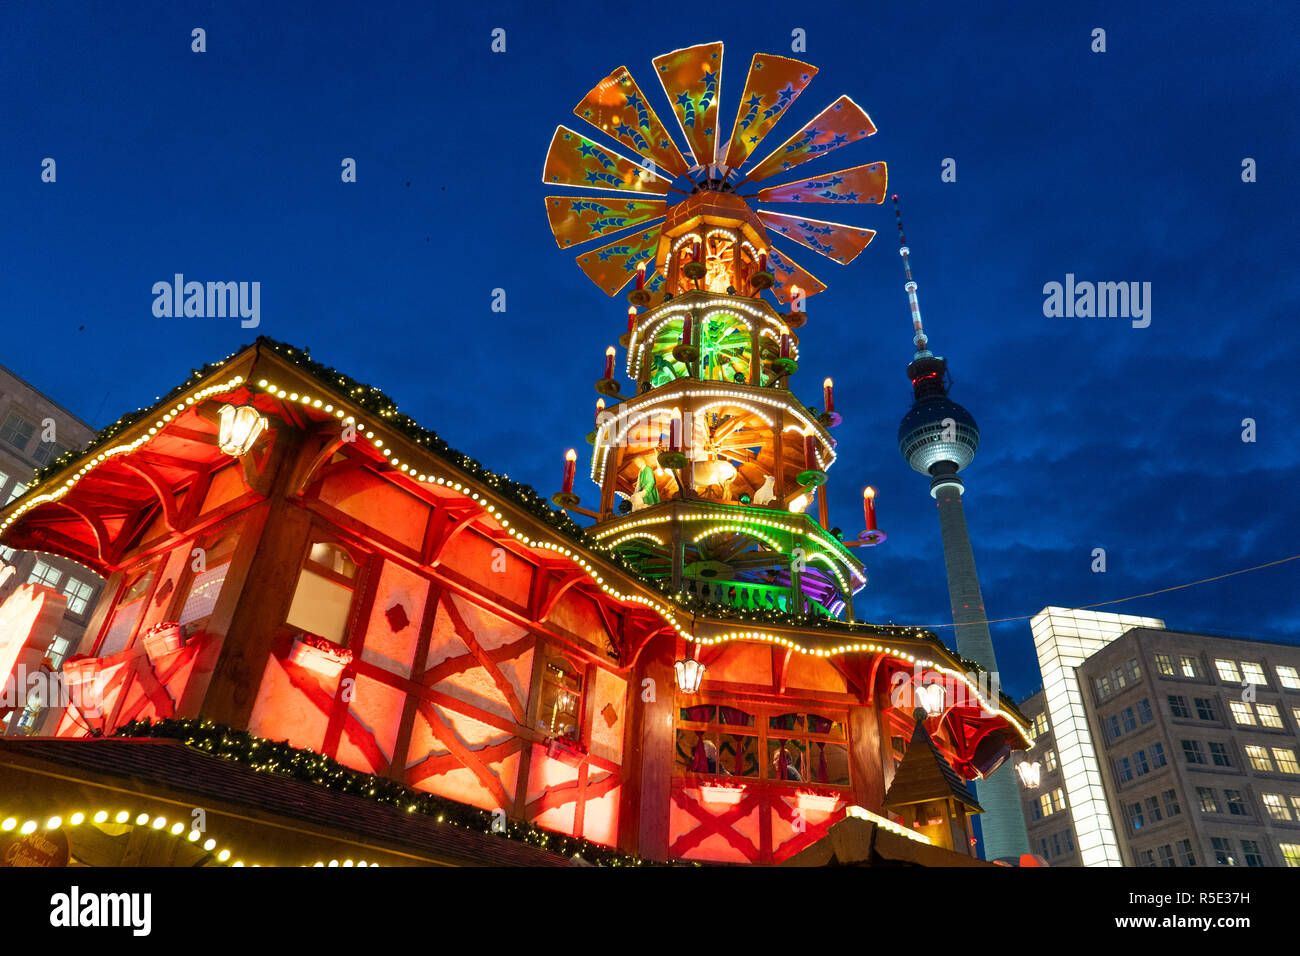 Traditional Christmas Market at Alexanderplatz in Mitte, Berlin, Germany. Pictured the Pyramiden Treff or Pyramid meeting place and Fersehturm, the te Stock Photo